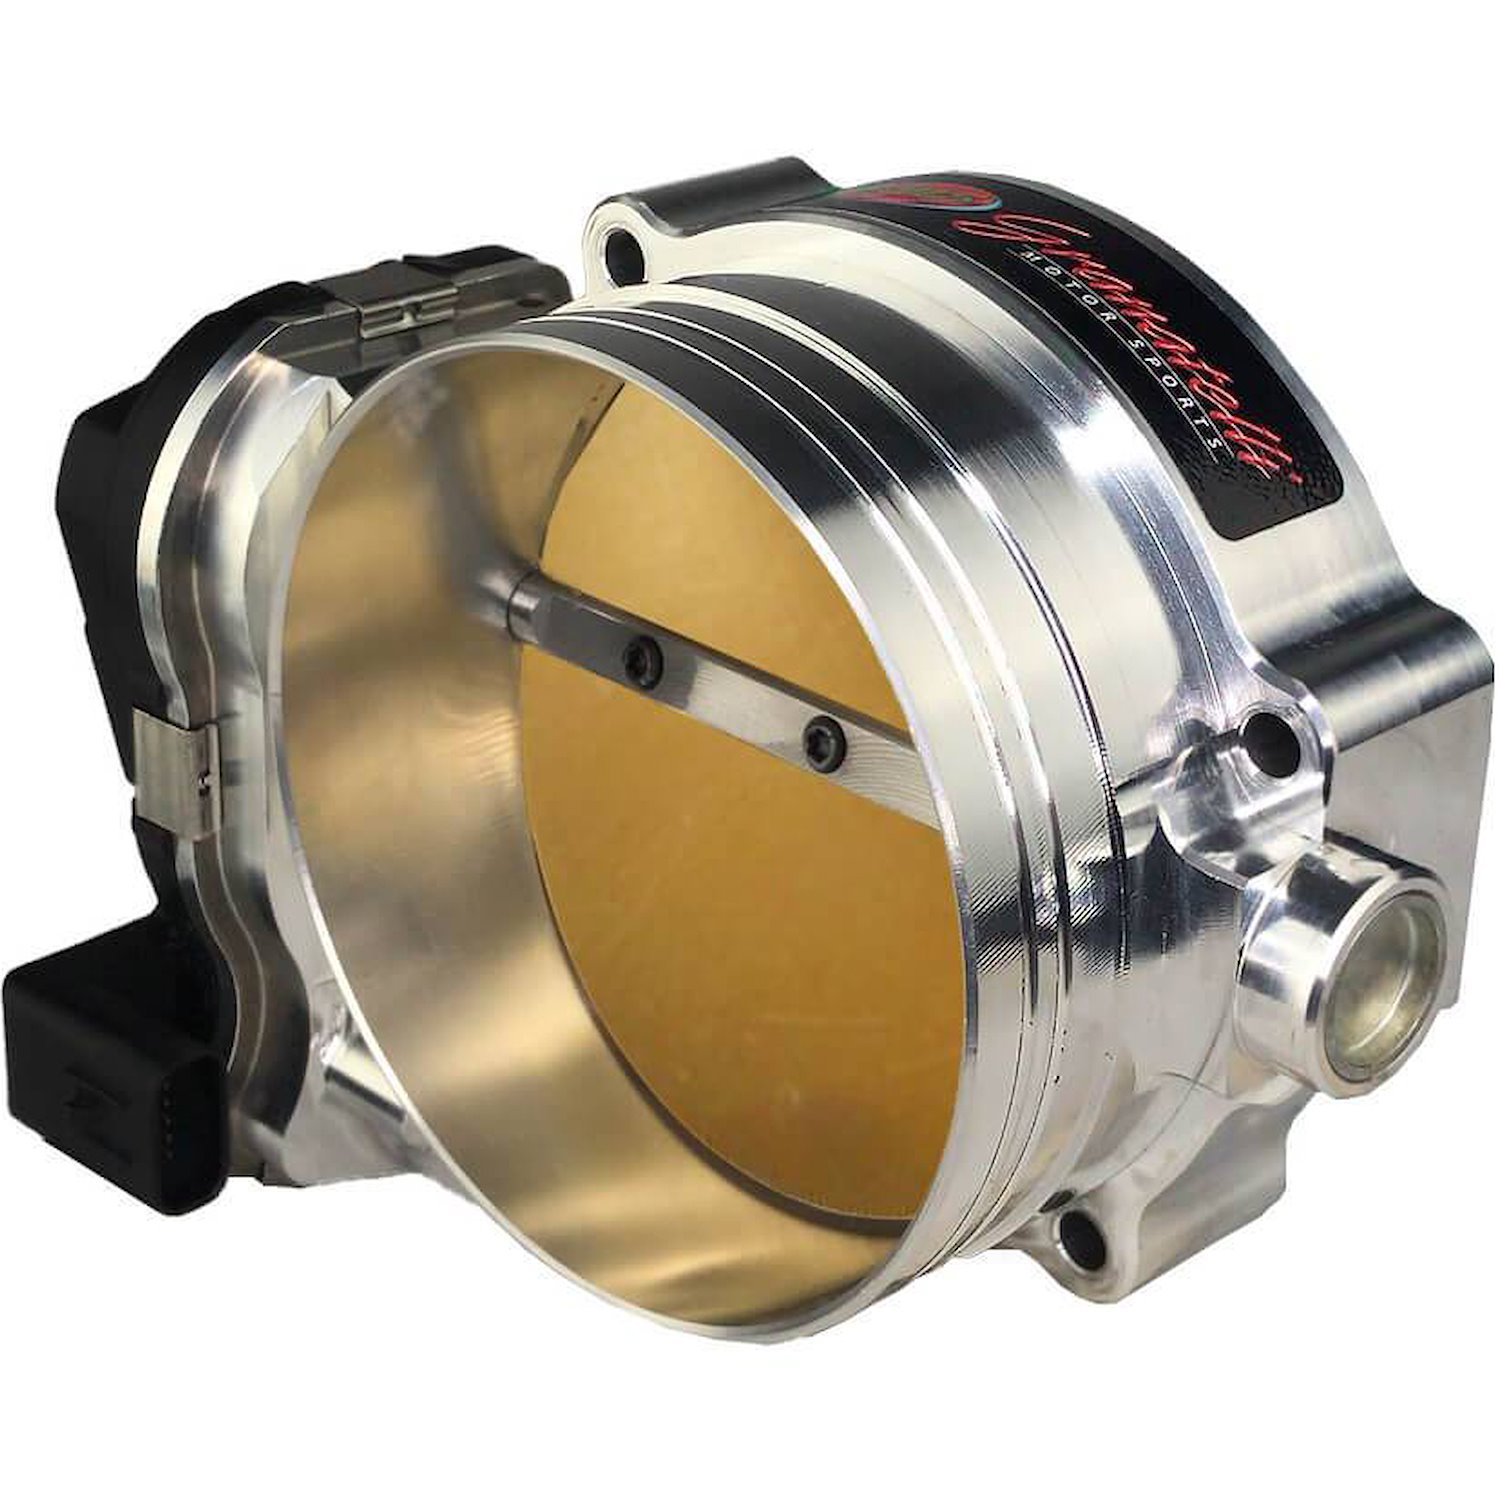 Race Drive-By-Wire 105 mm Throttle Body for Dodge Hellcat & Jeep Trackhawk [Natural Finish]